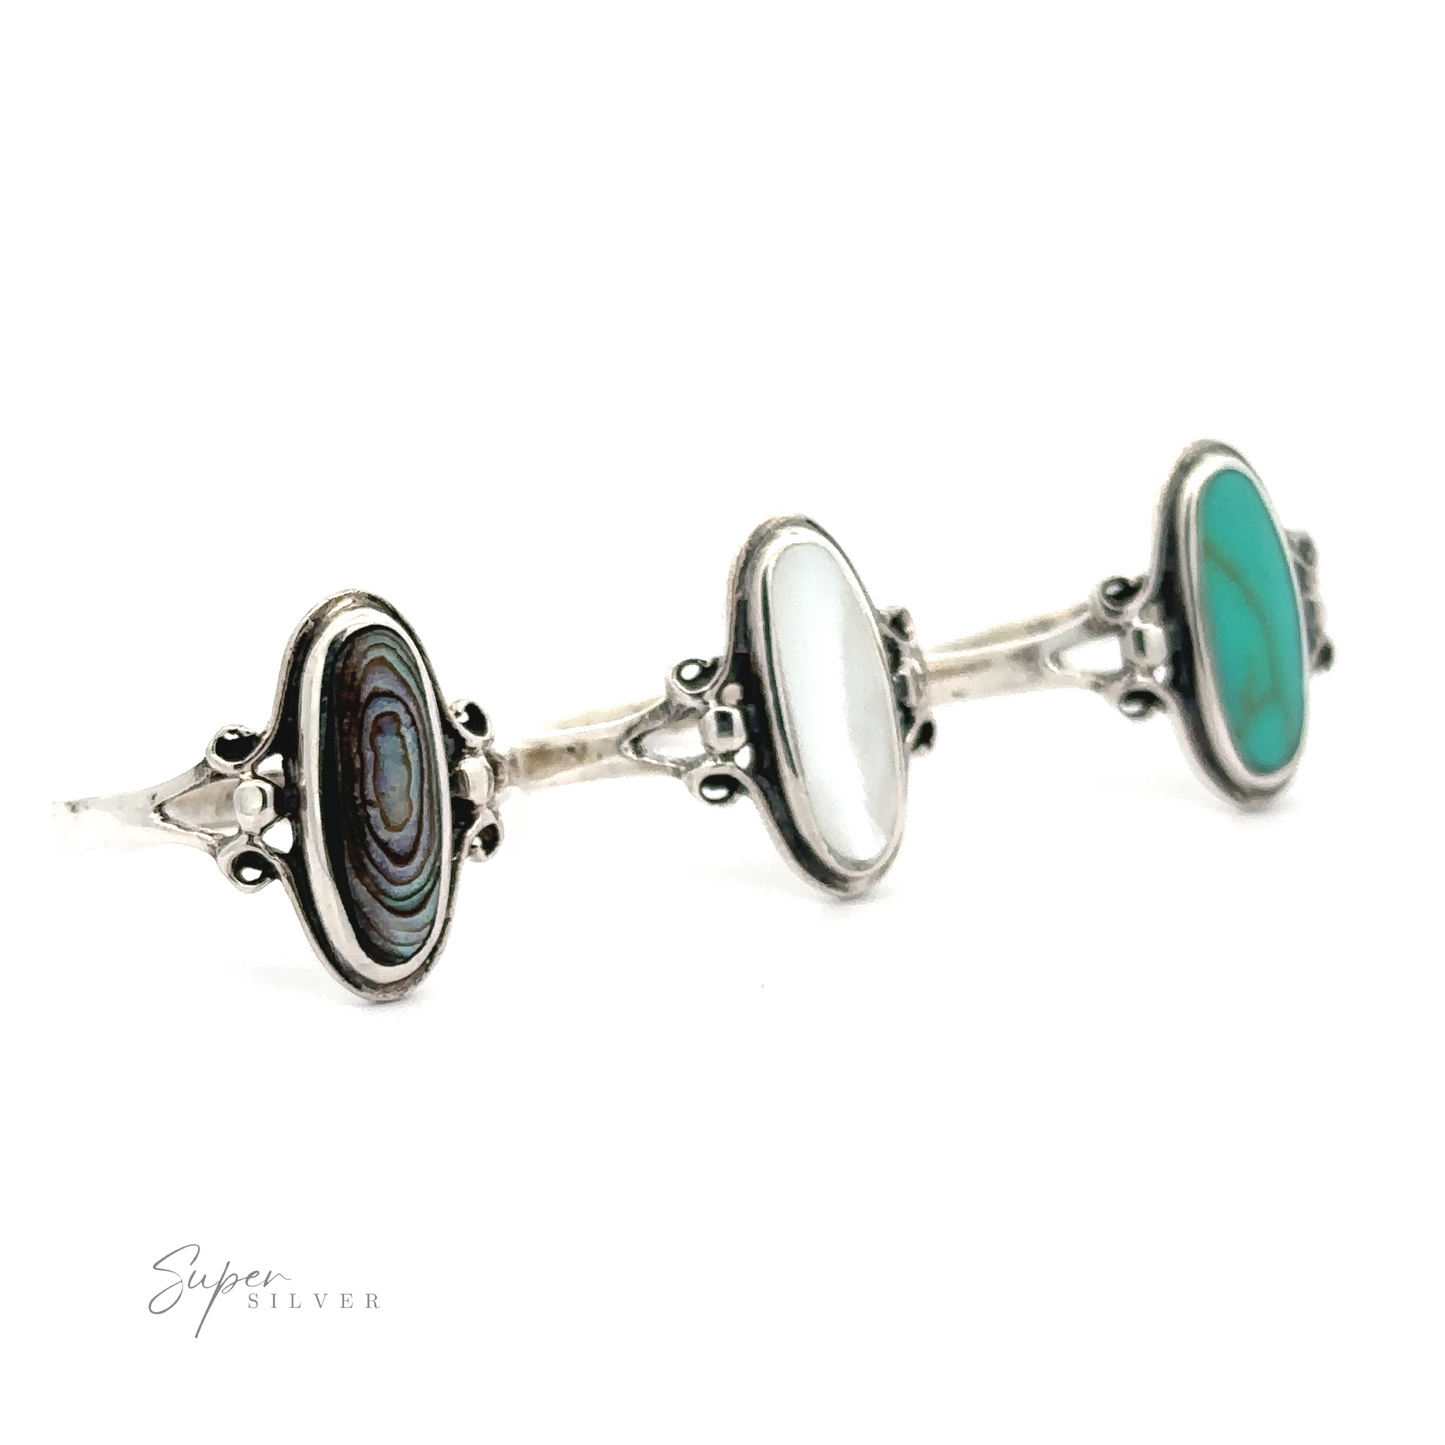 Three sterling silver rings with inlaid green and the Oval Turquoise Ring.